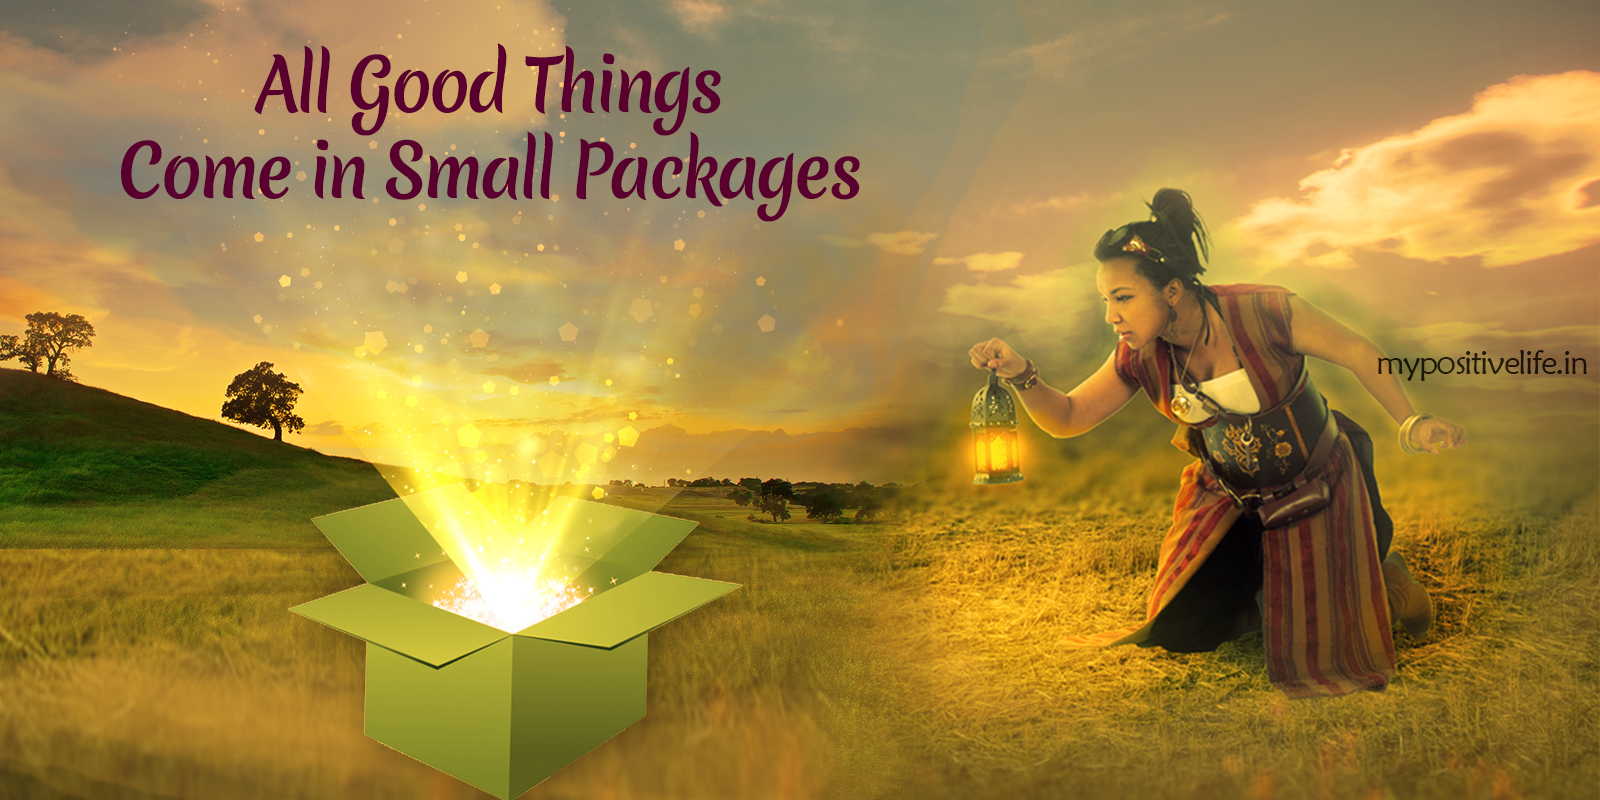 All Good Things Come in Small Packages